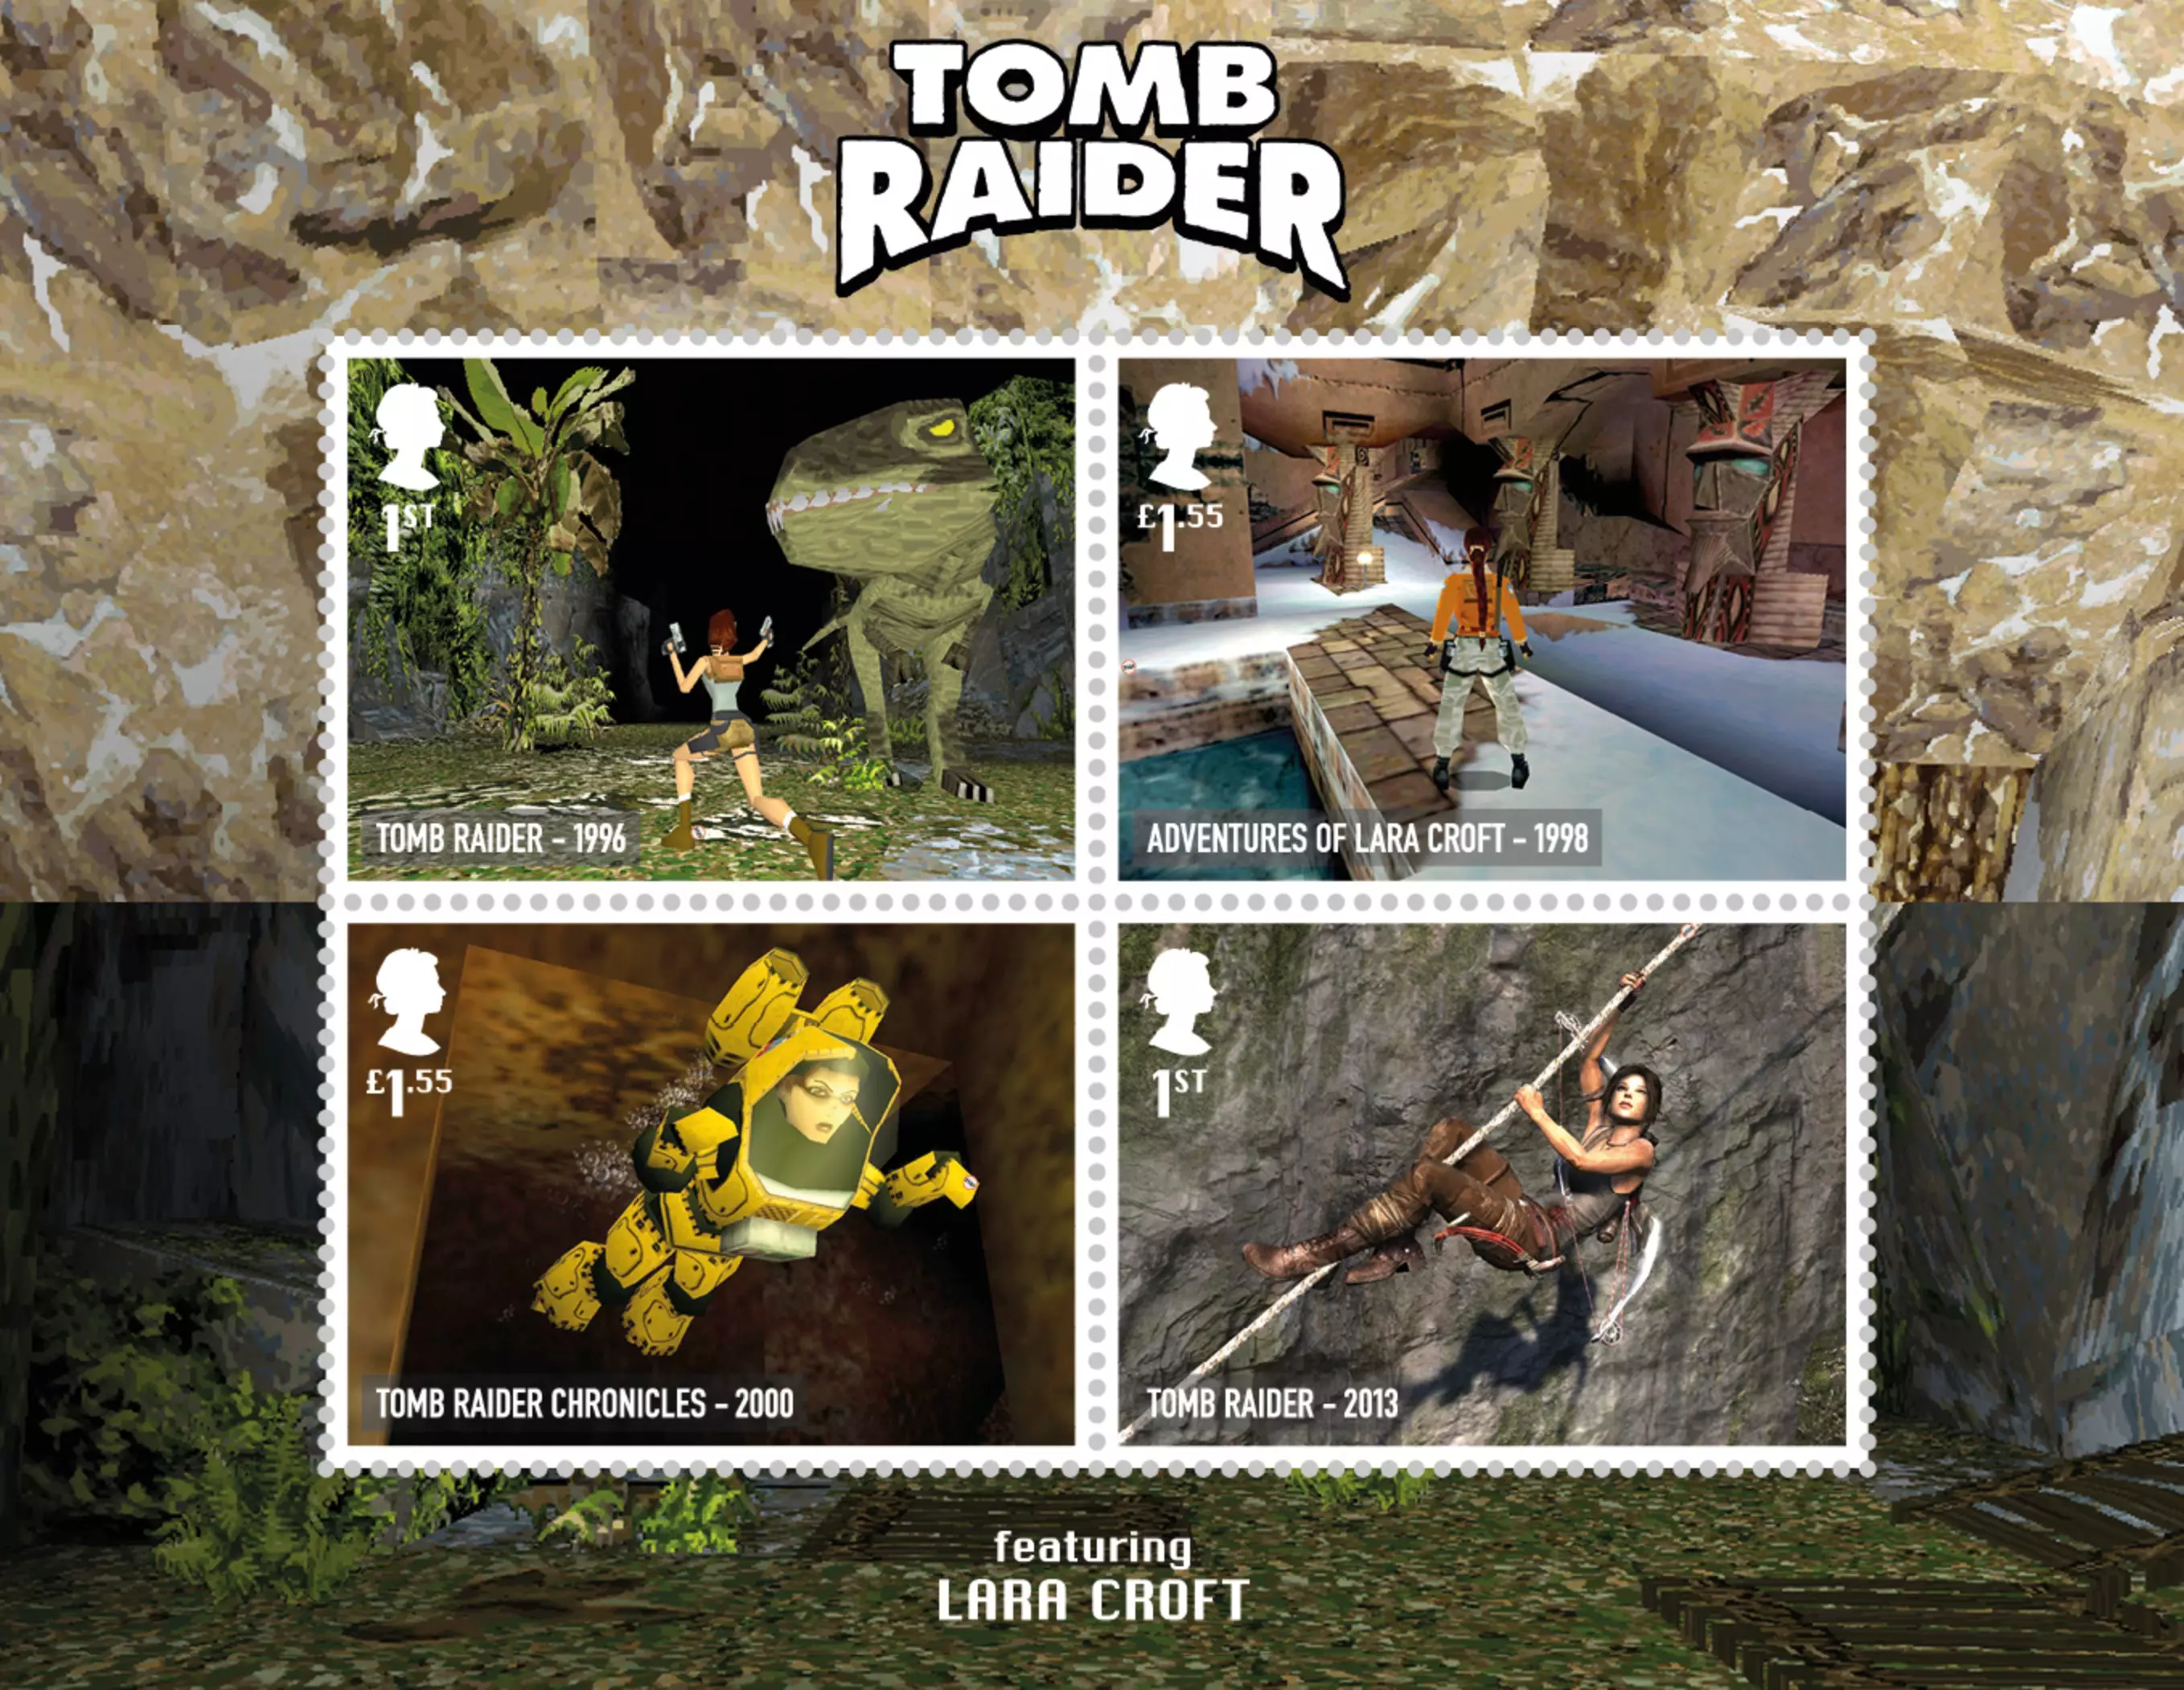 The four Tomb Raider stamps